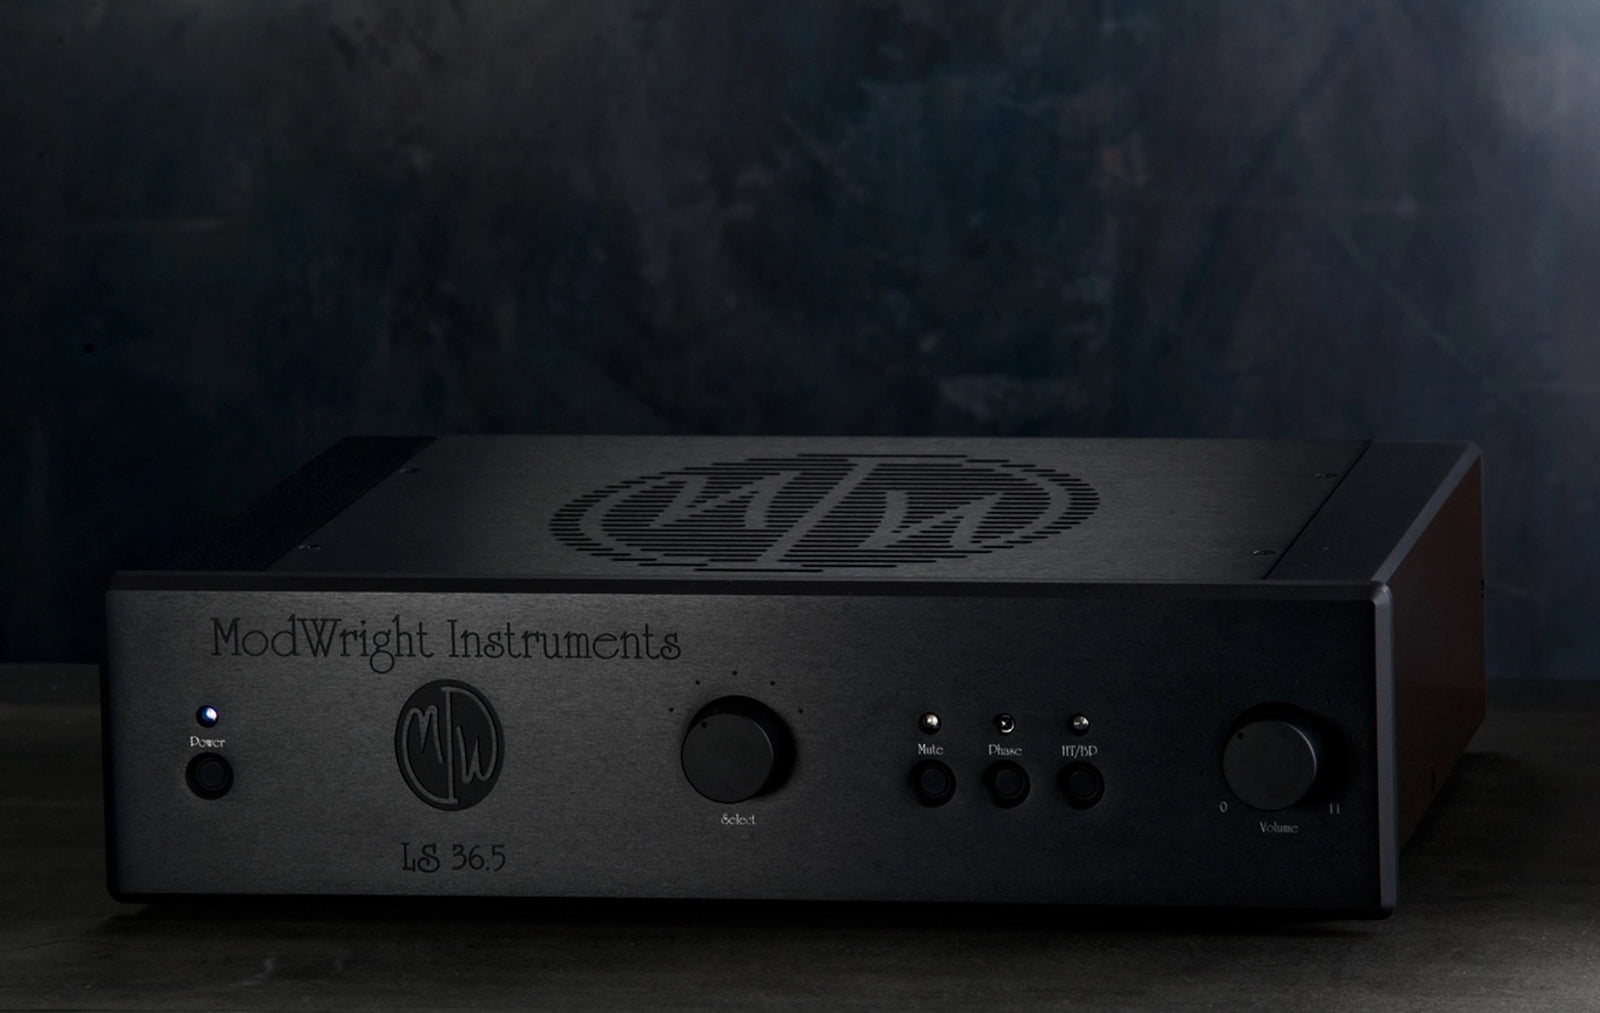 ModWright is a company producing modifications to digital products such as  tube amplifiers, phono stages, headphone amplifiers, amplifiers, integrated amplifier, preamplifier.